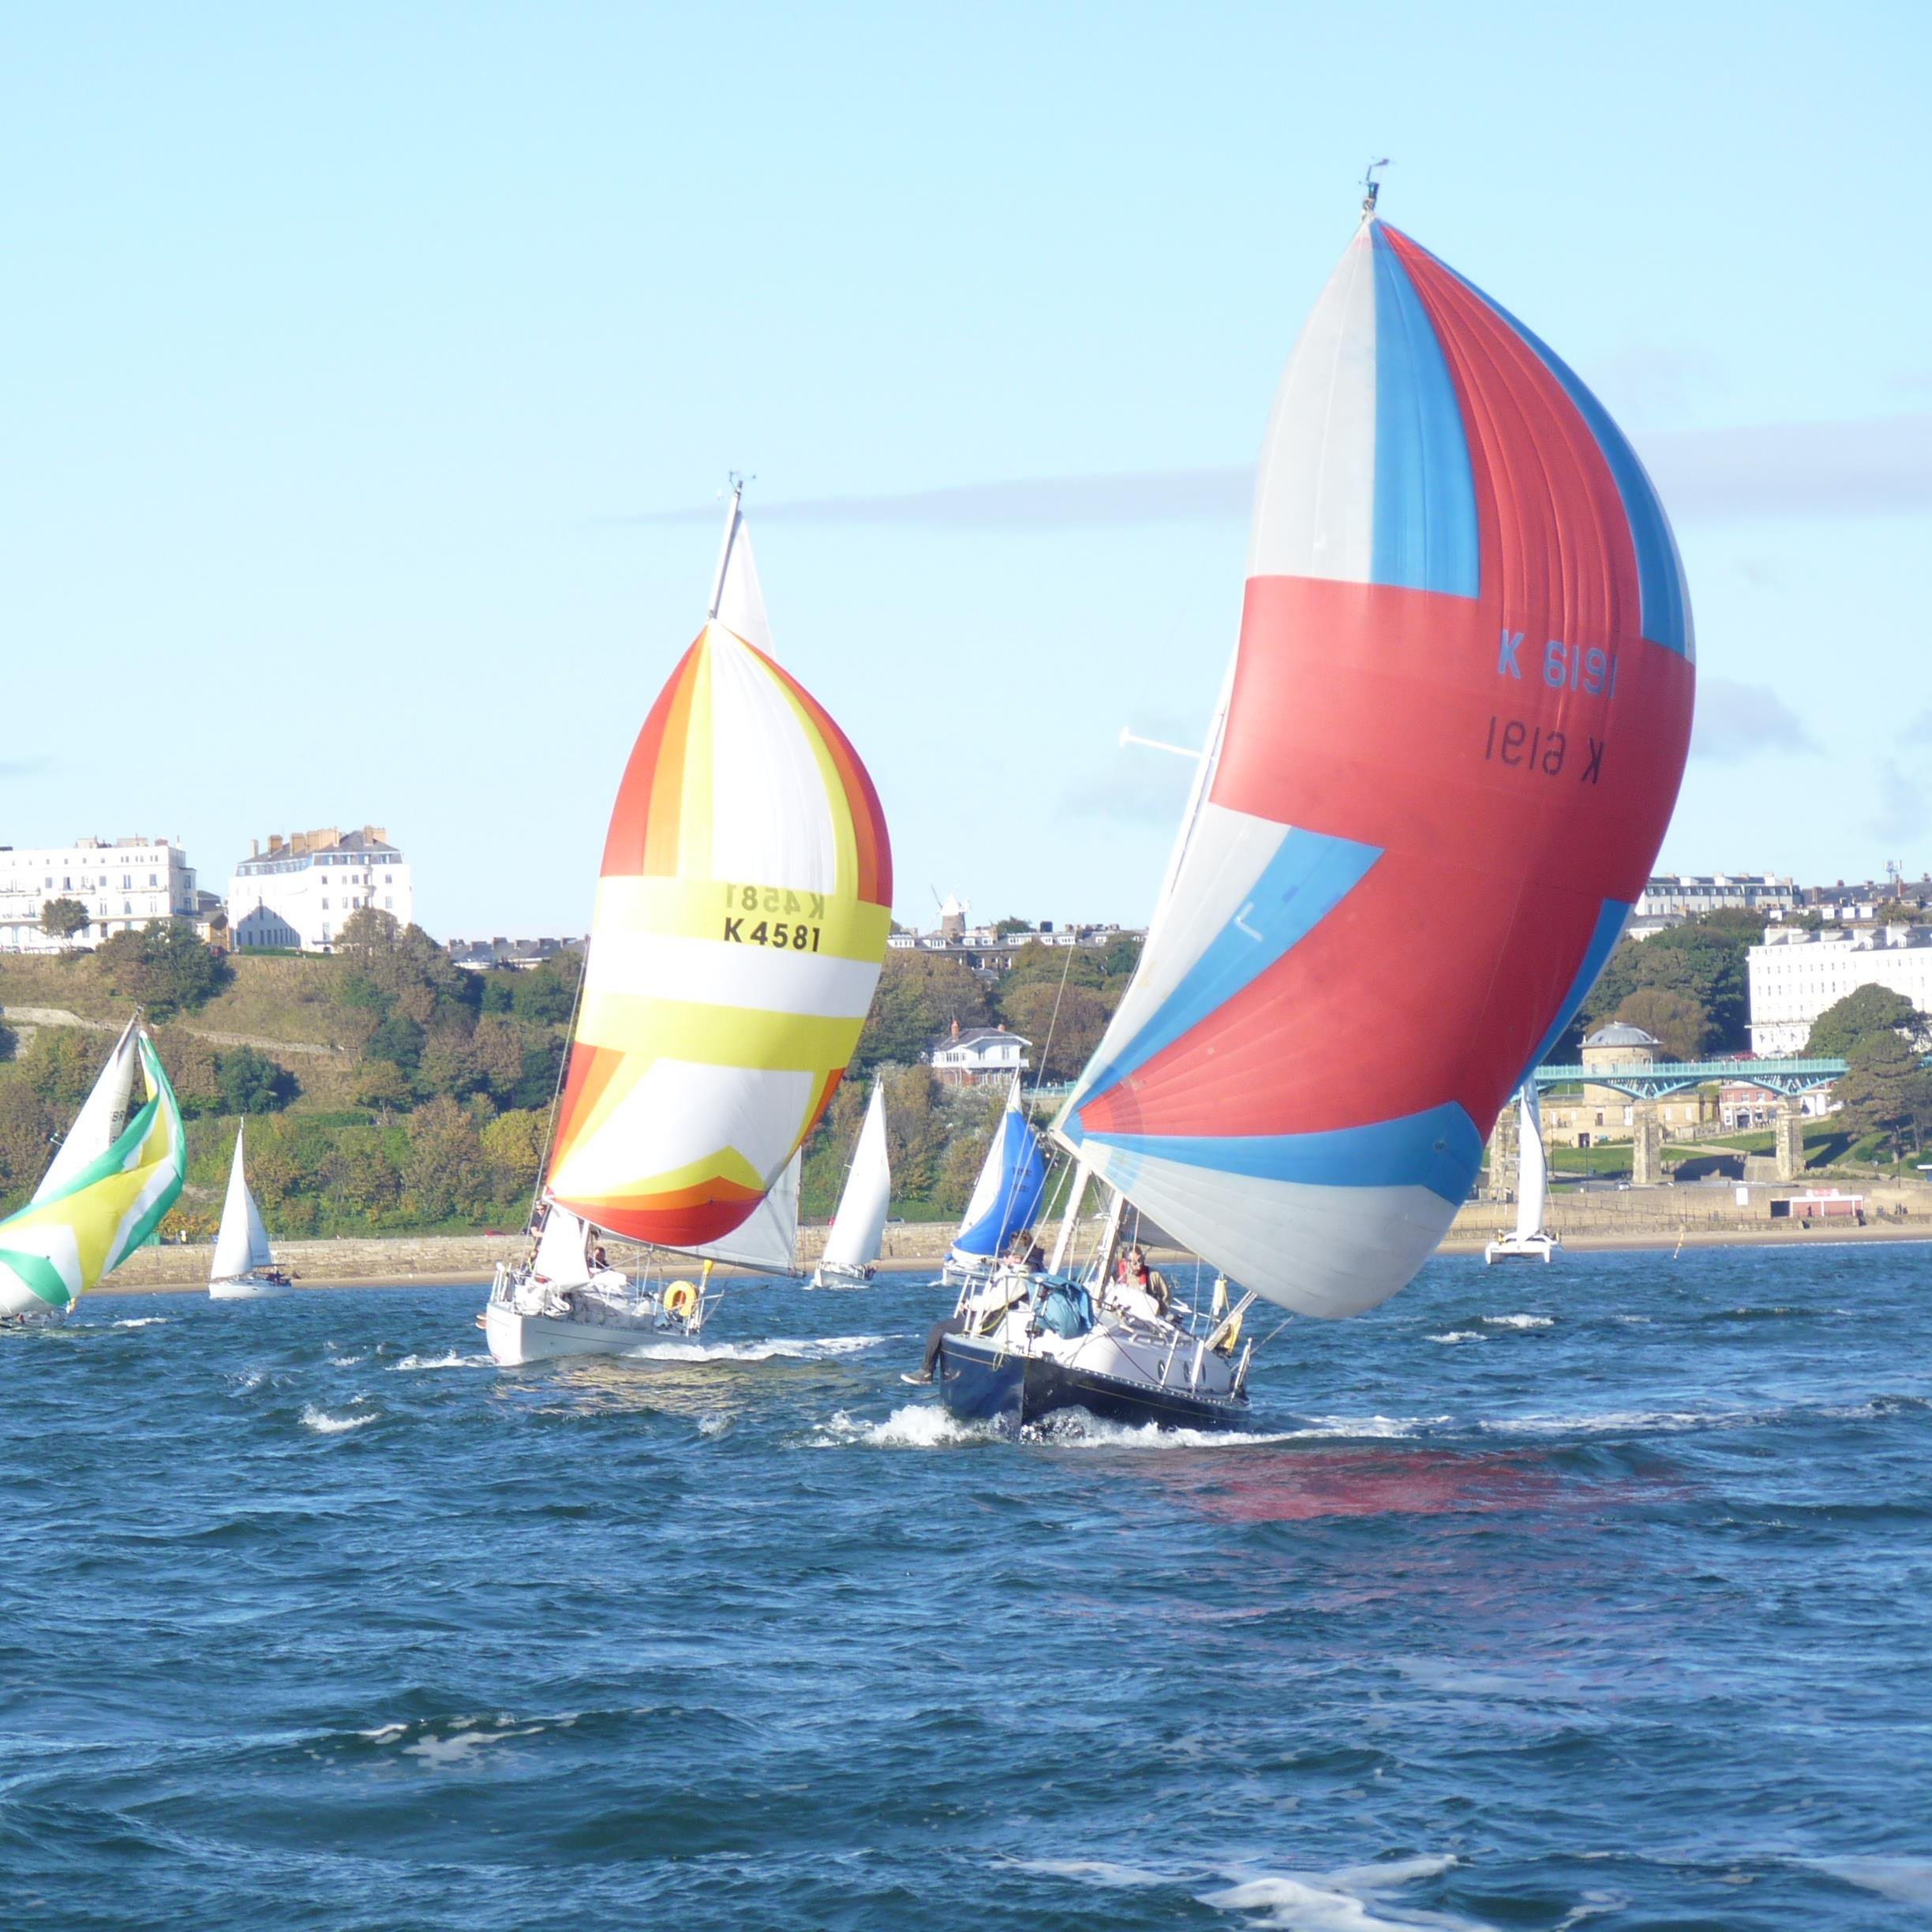 Racing and Cruising on the North East coast.